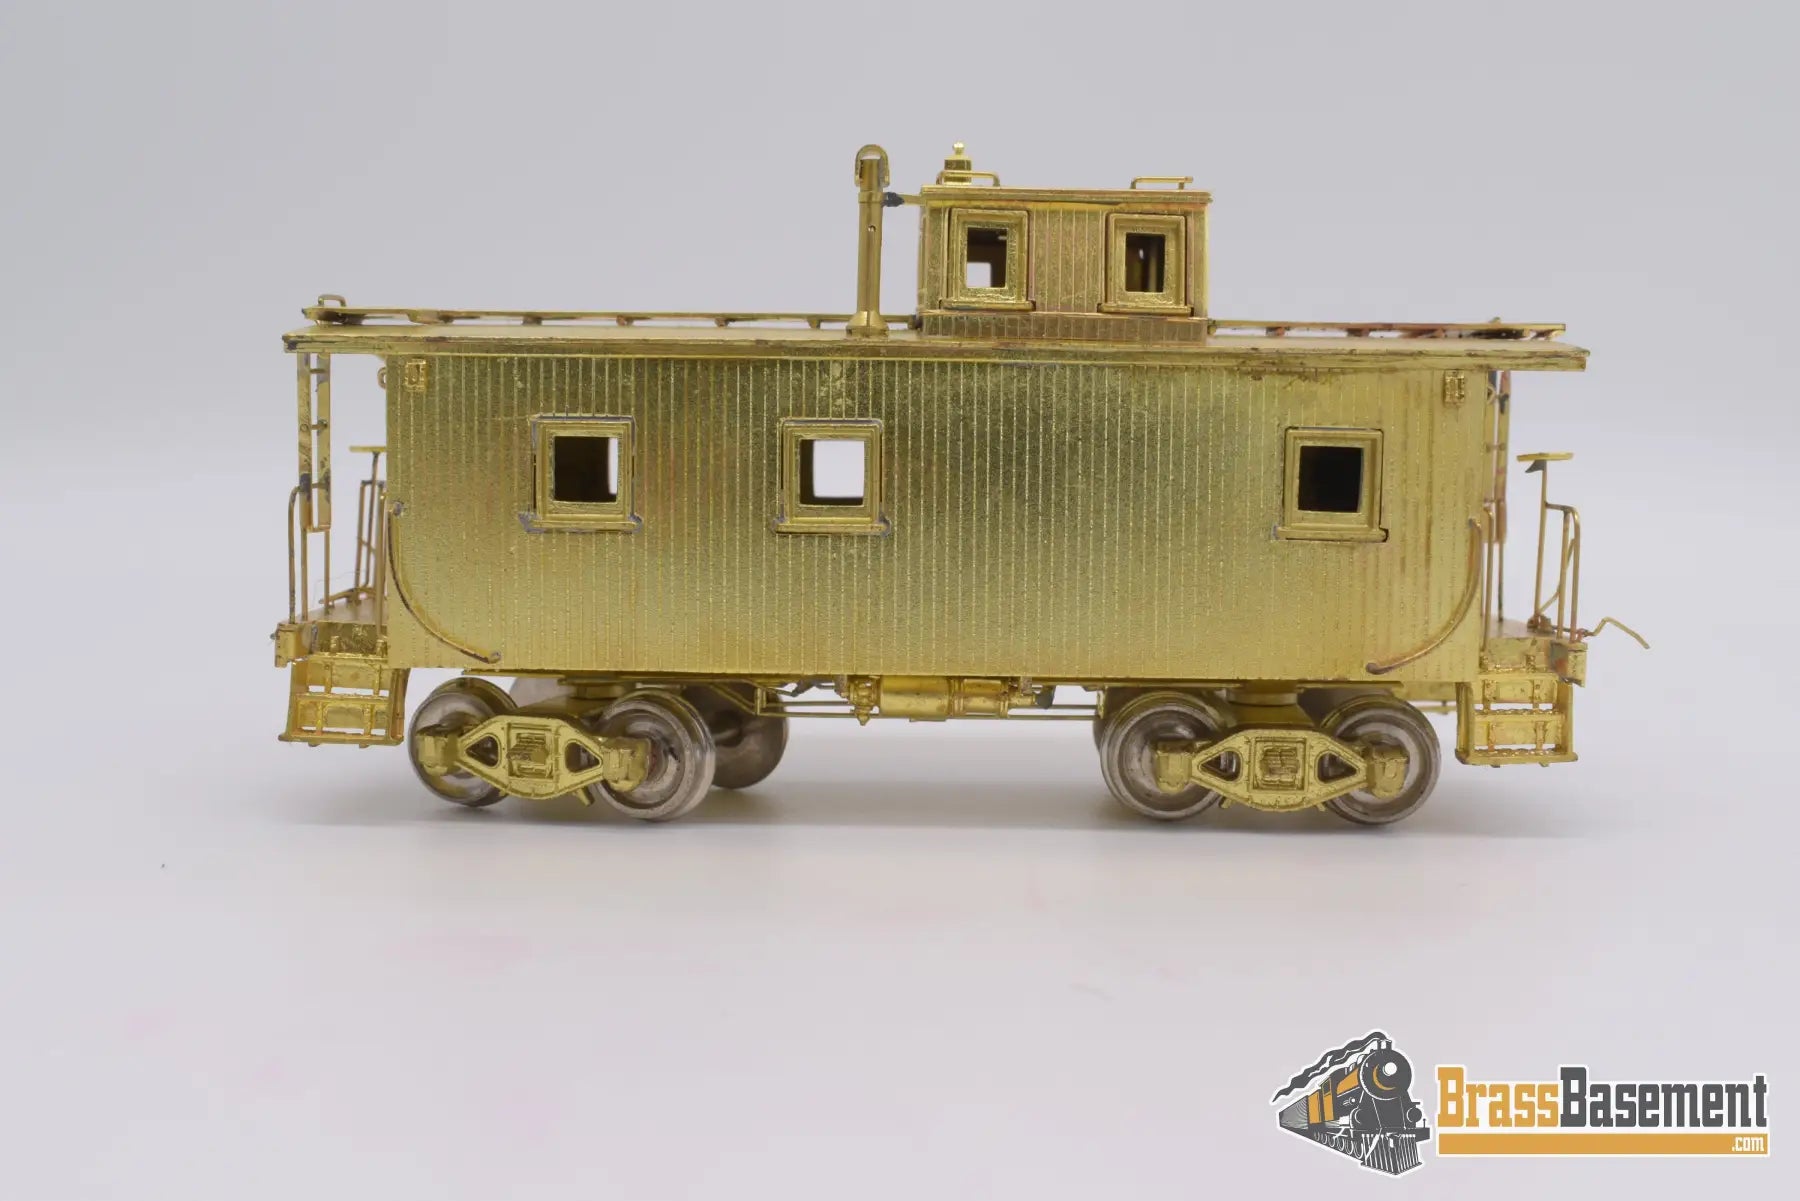 Ho Brass - Alco New York Central 24’ Wood Caboose Unpainted & Missing Step Freight